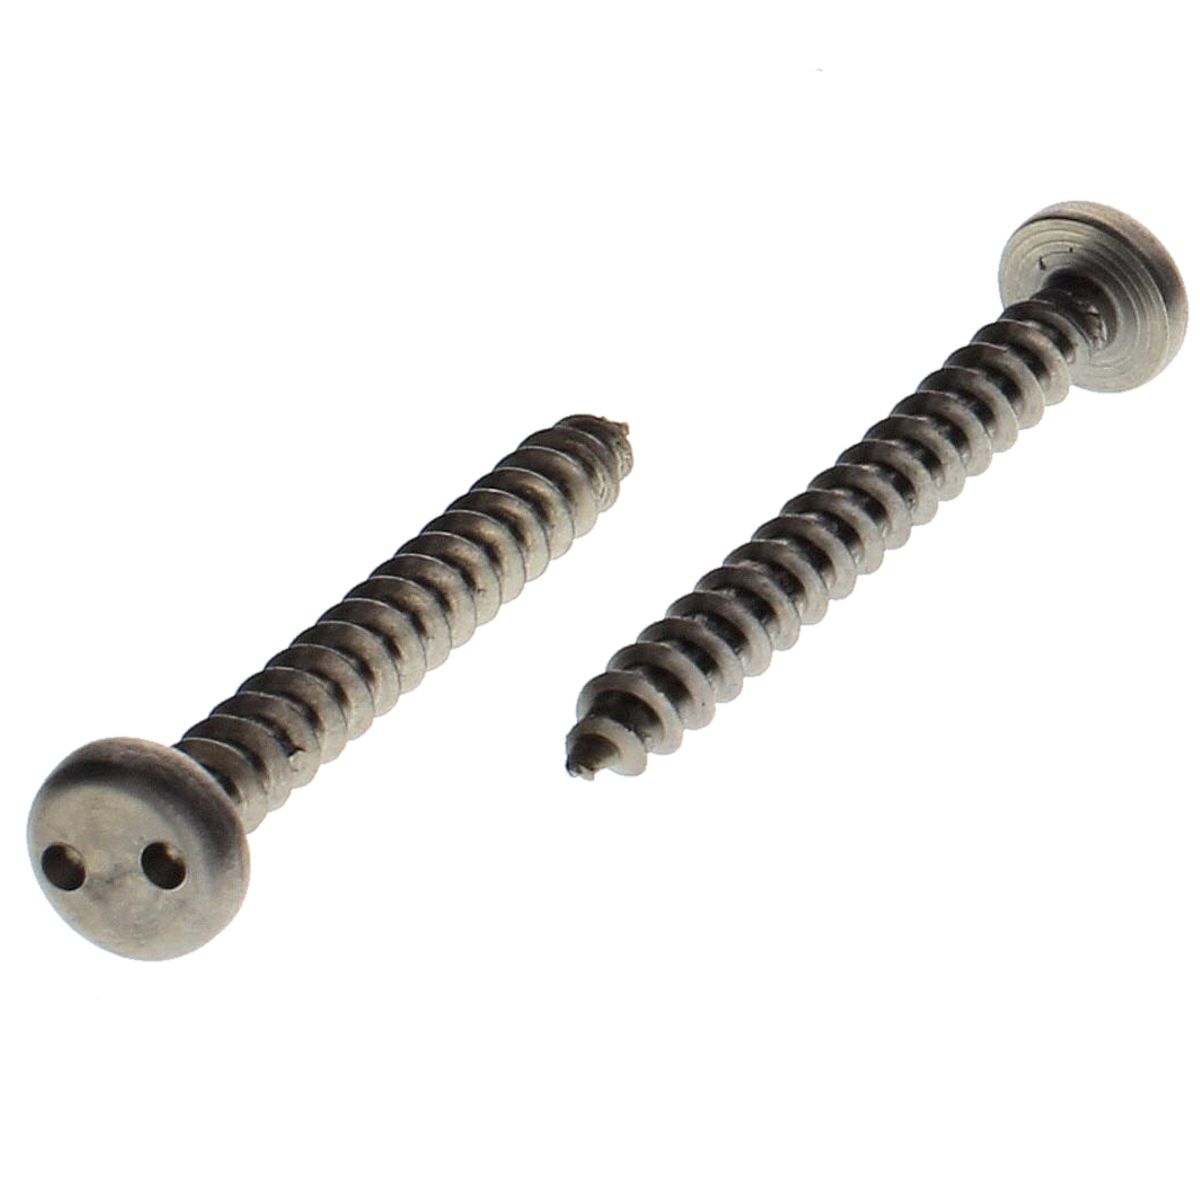 #8 x 1" Pan Head Spanner Security Tapping Screws — 18-8 Stainless Steel, 100/PKG